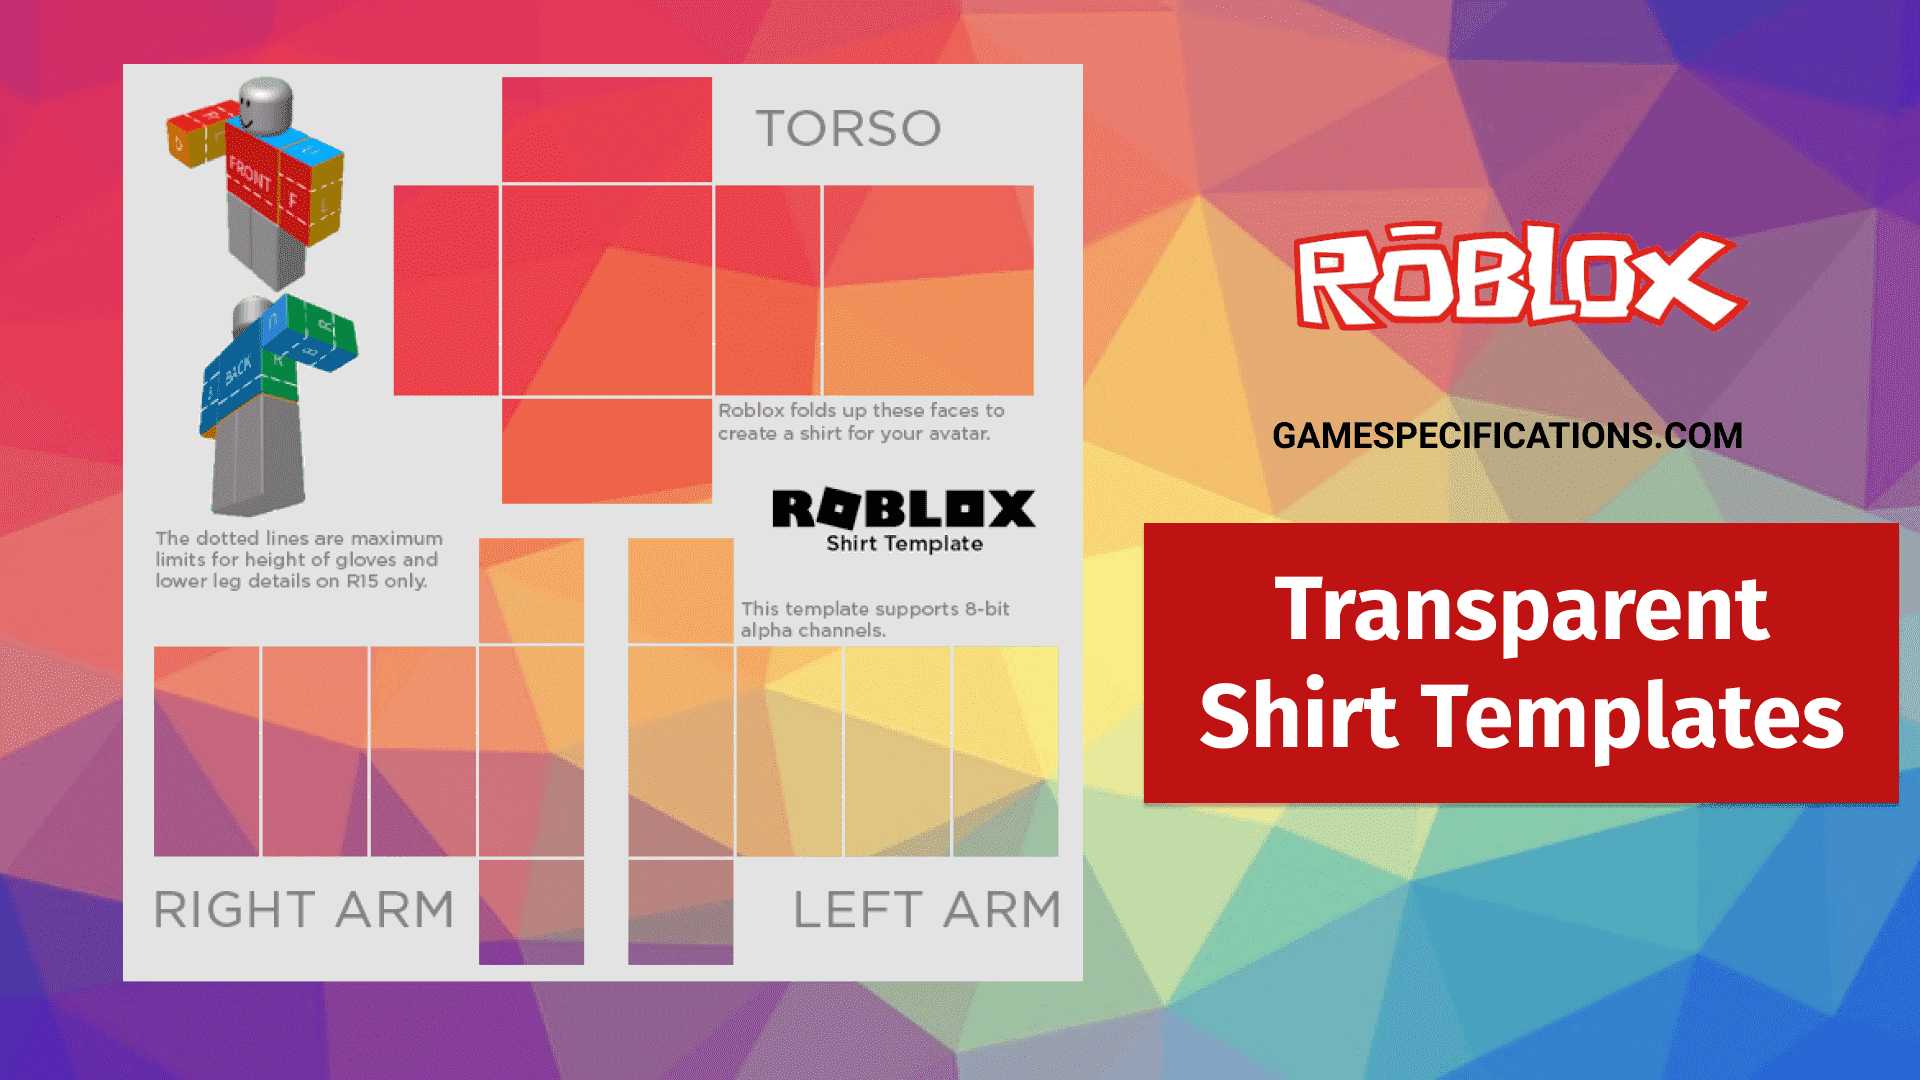 Roblox Transparent Shirt Templates And How To Make Them Game Specifications - roblox shirt transperent